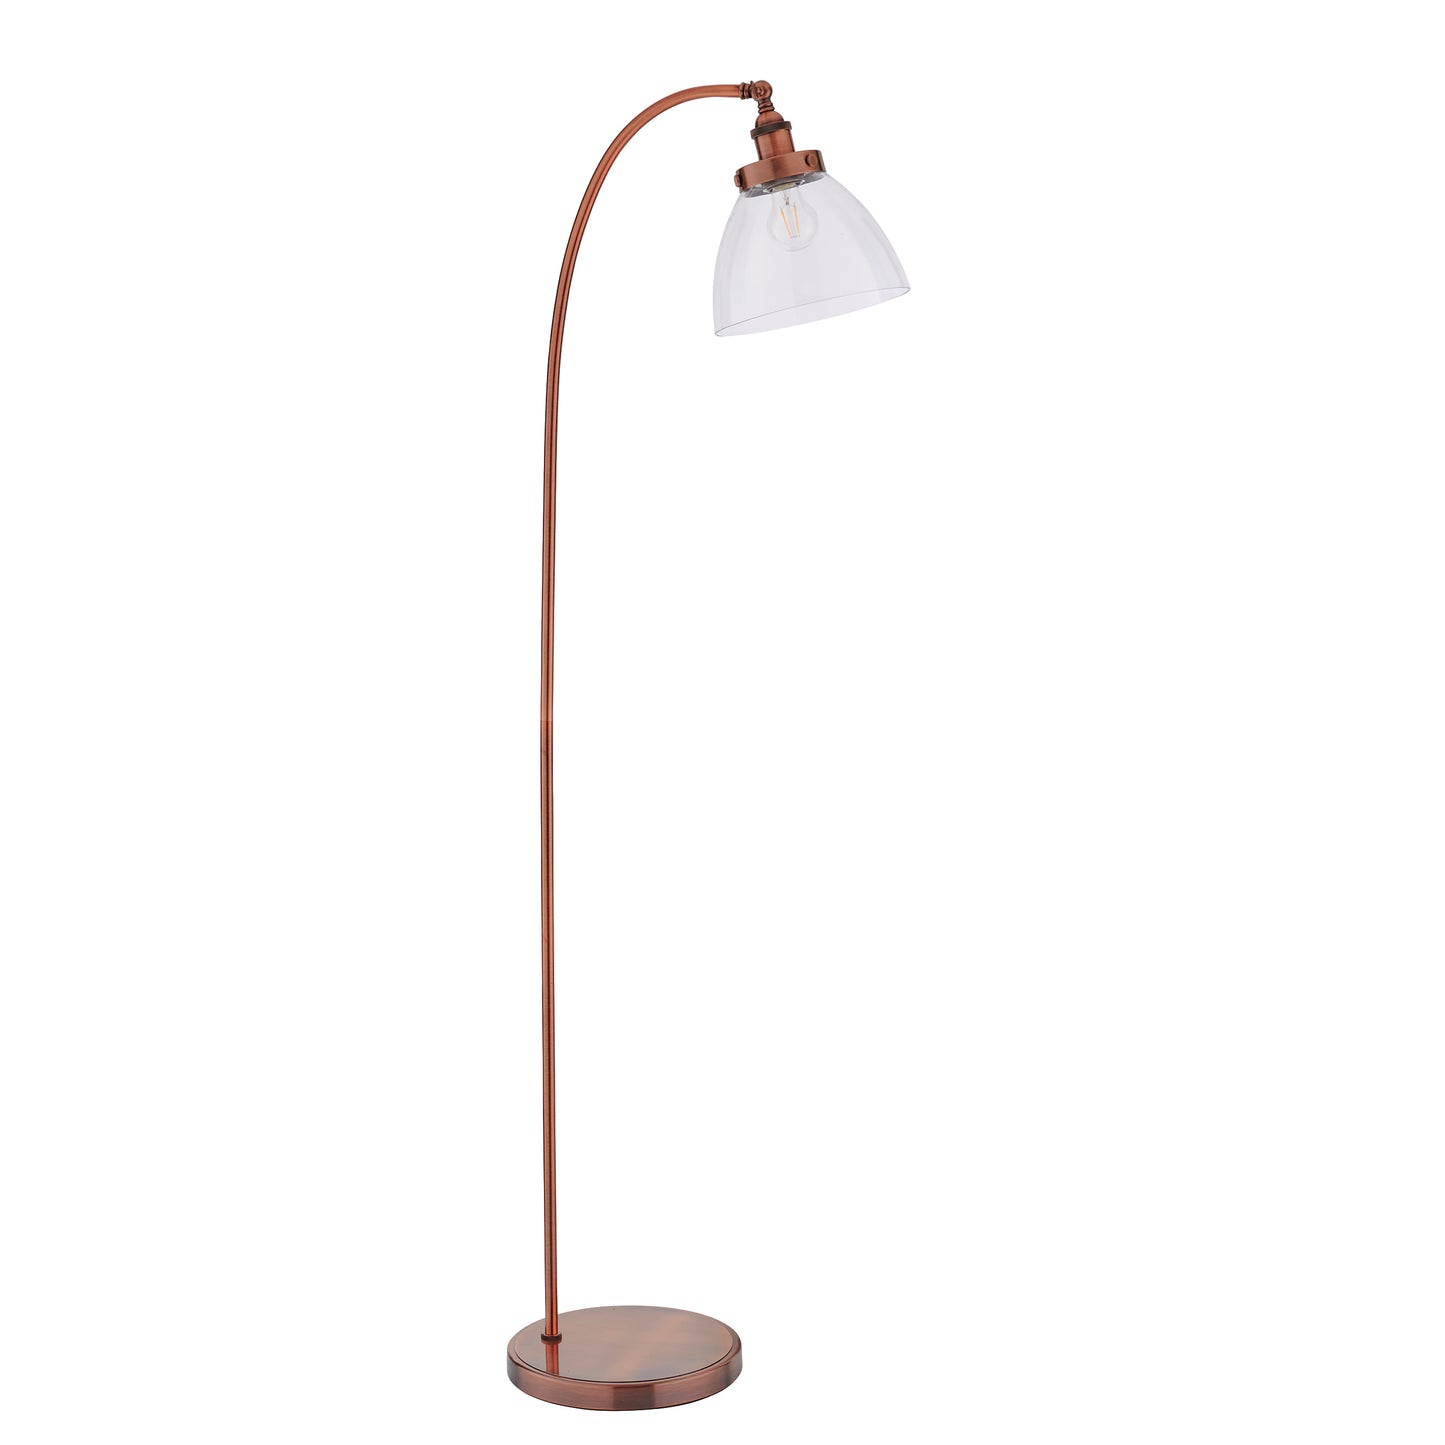 HAN Aged Copper Floor Lamp with Clear Glass Shade - ID 11021